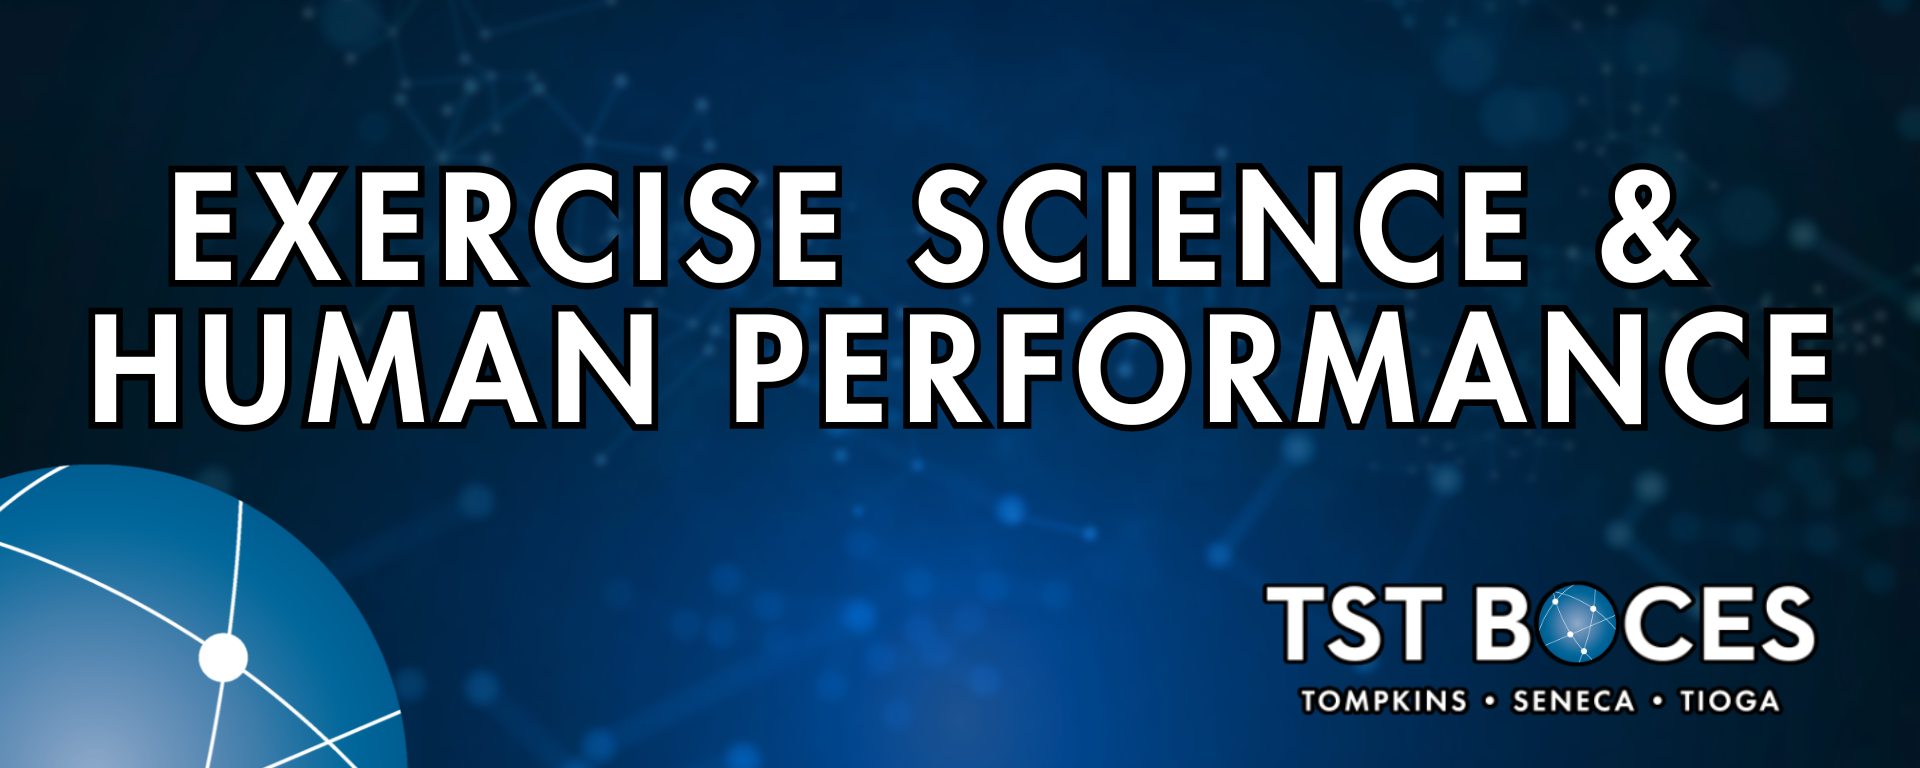 exercise science & human performance banner